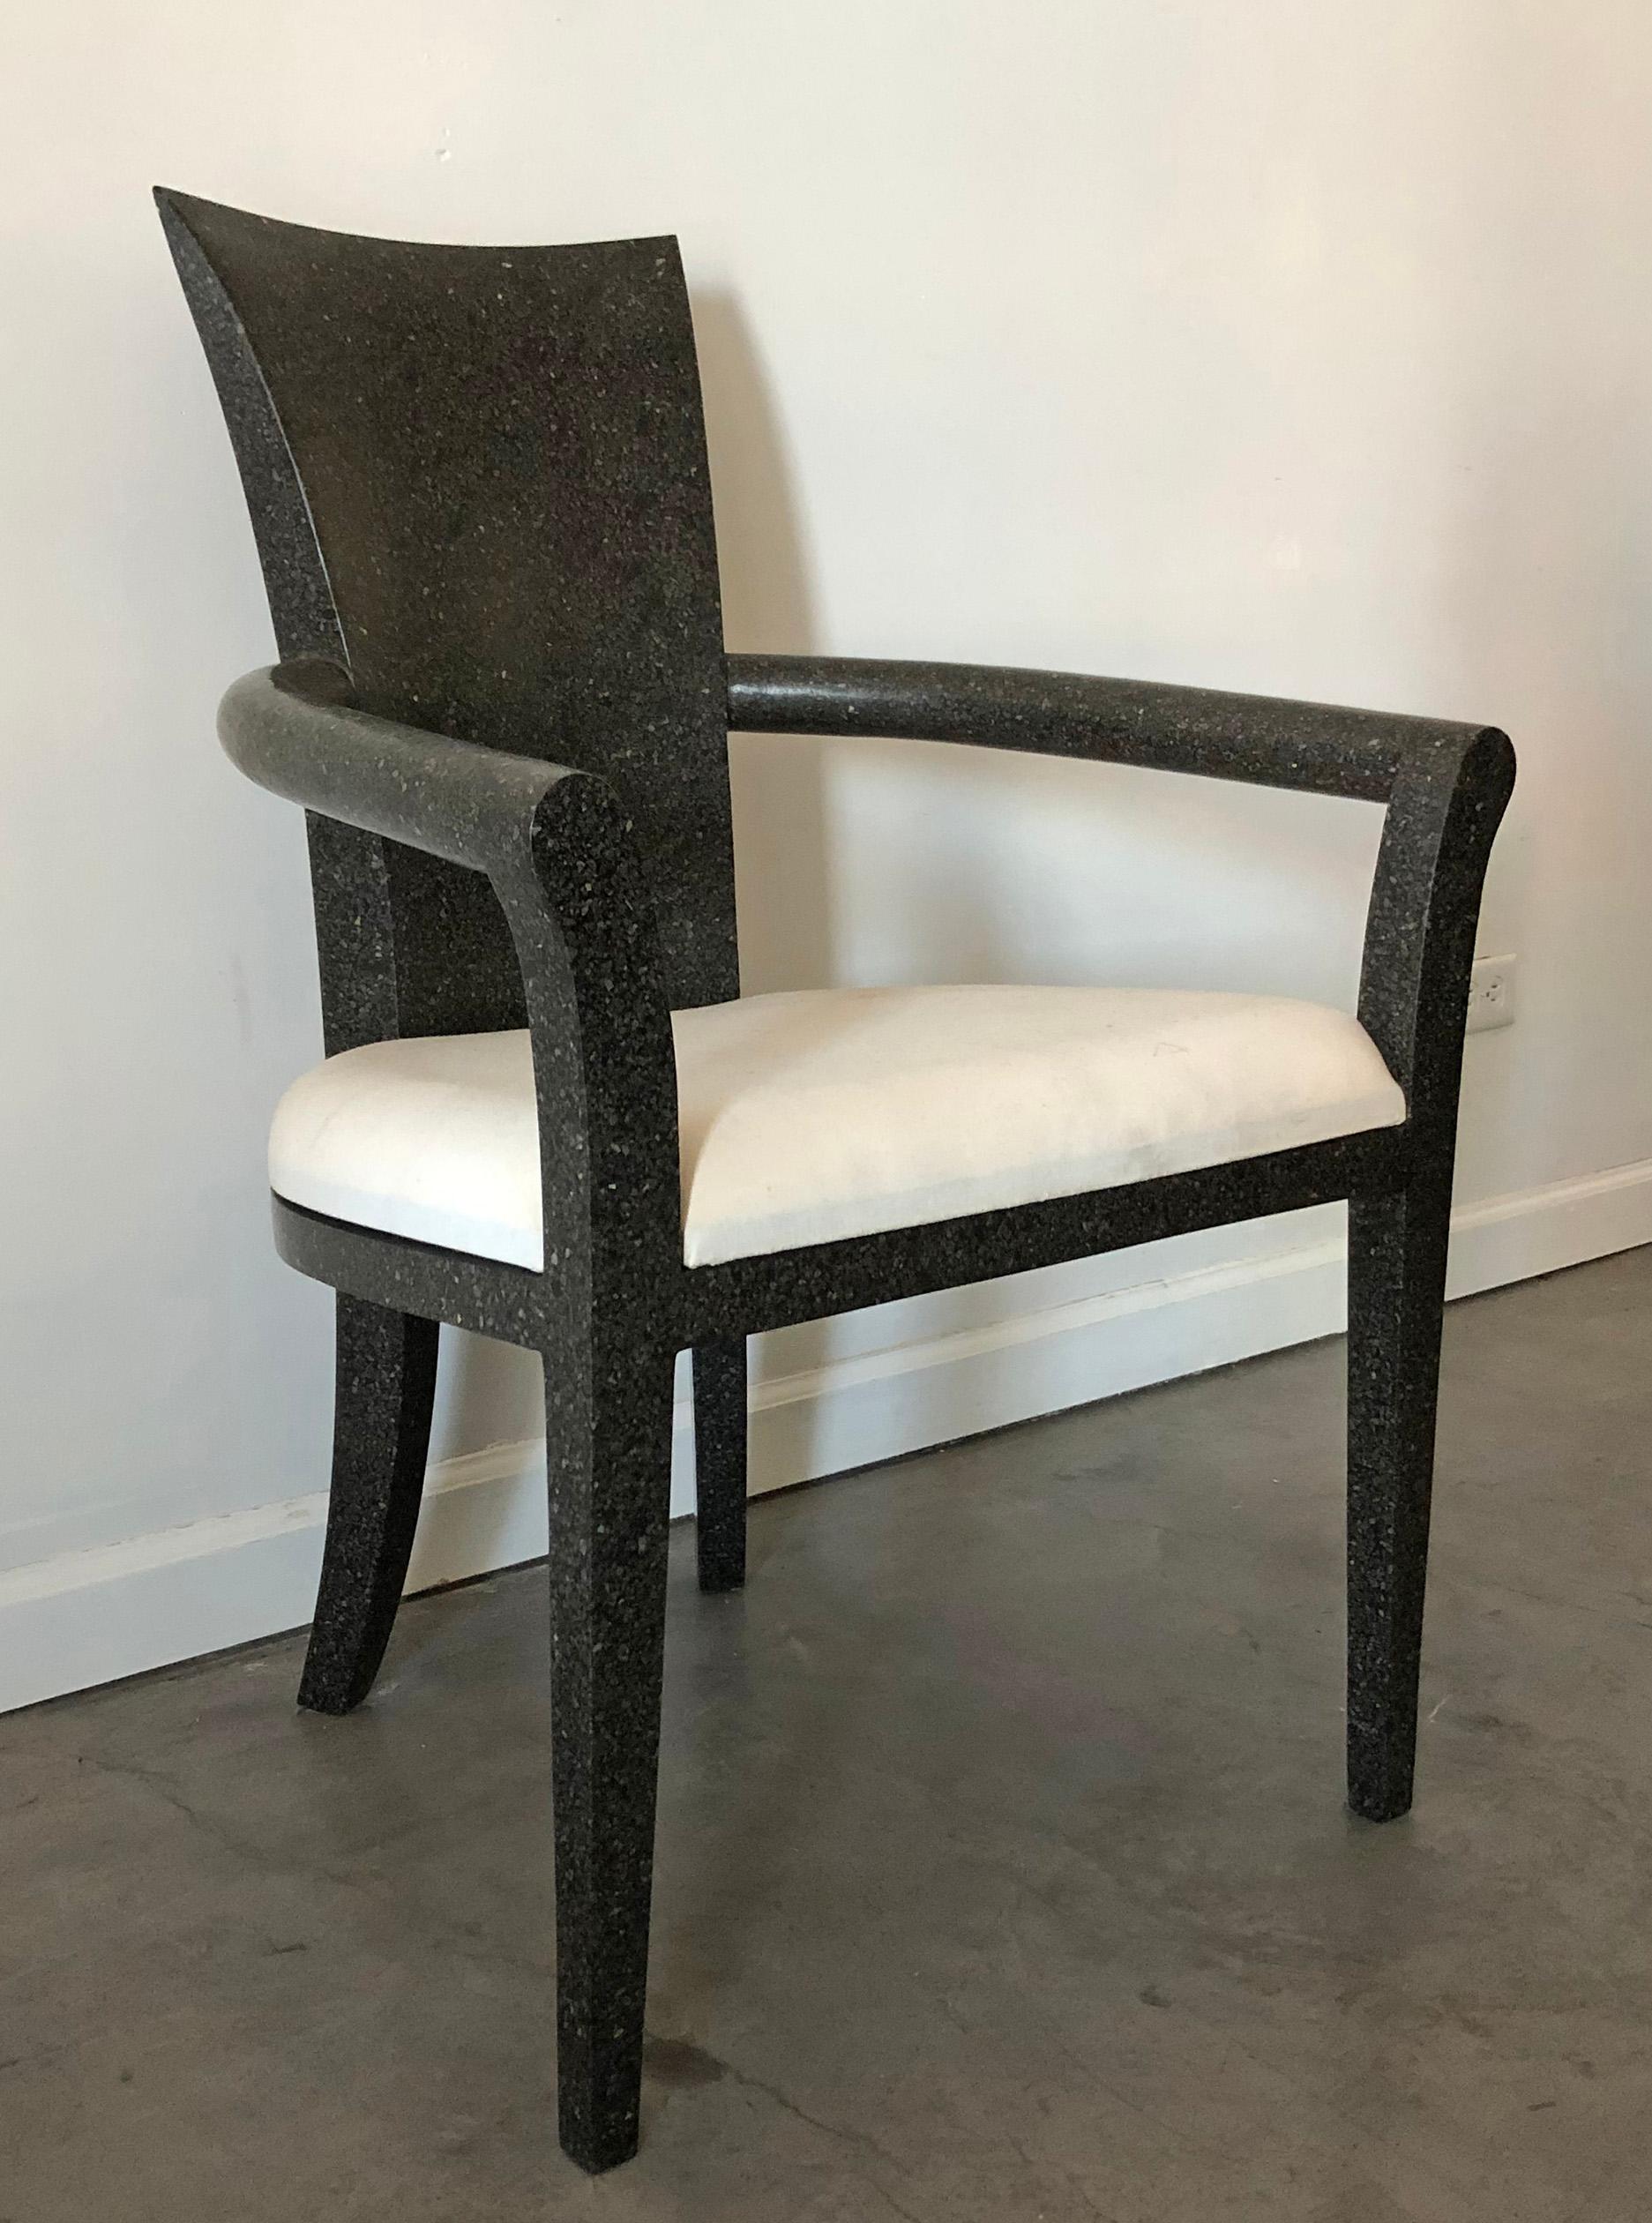 An absolutely gorgeous solid terrazzo armchair by Carlo furniture. This armchair features a speckled black and grey terrazzo with a white muslin upholstered seat. 

Ideal as an accent chair, or desk chair; this gorgeous, smooth terrazzo armchair